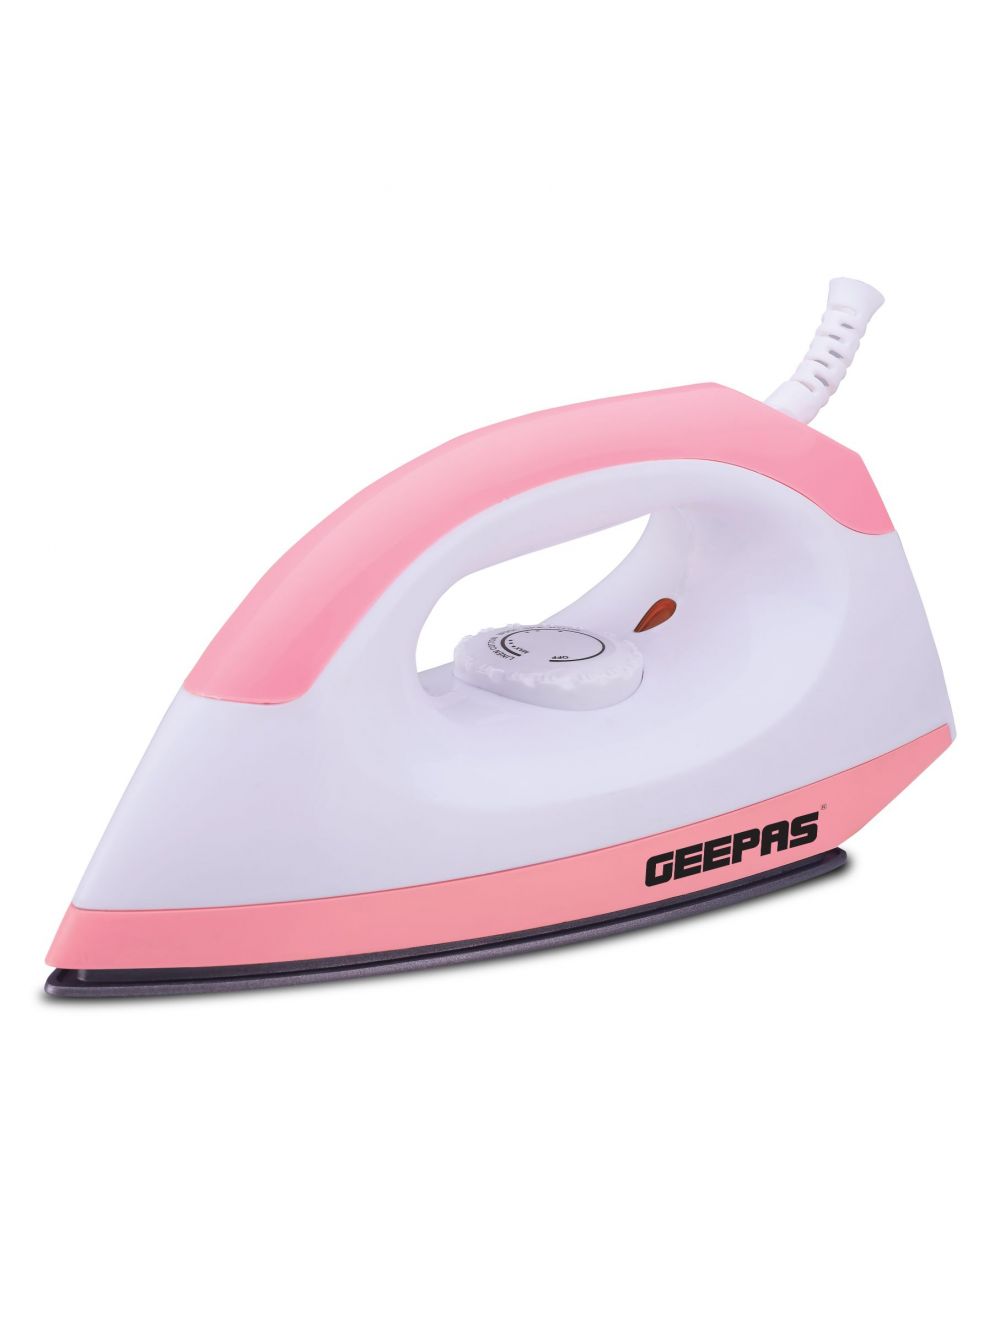 Geepas 1200W Dry Iron | reliable performance | lightweight | variable steam settings | safety features | stylish | even heat distribution | Halabh.com